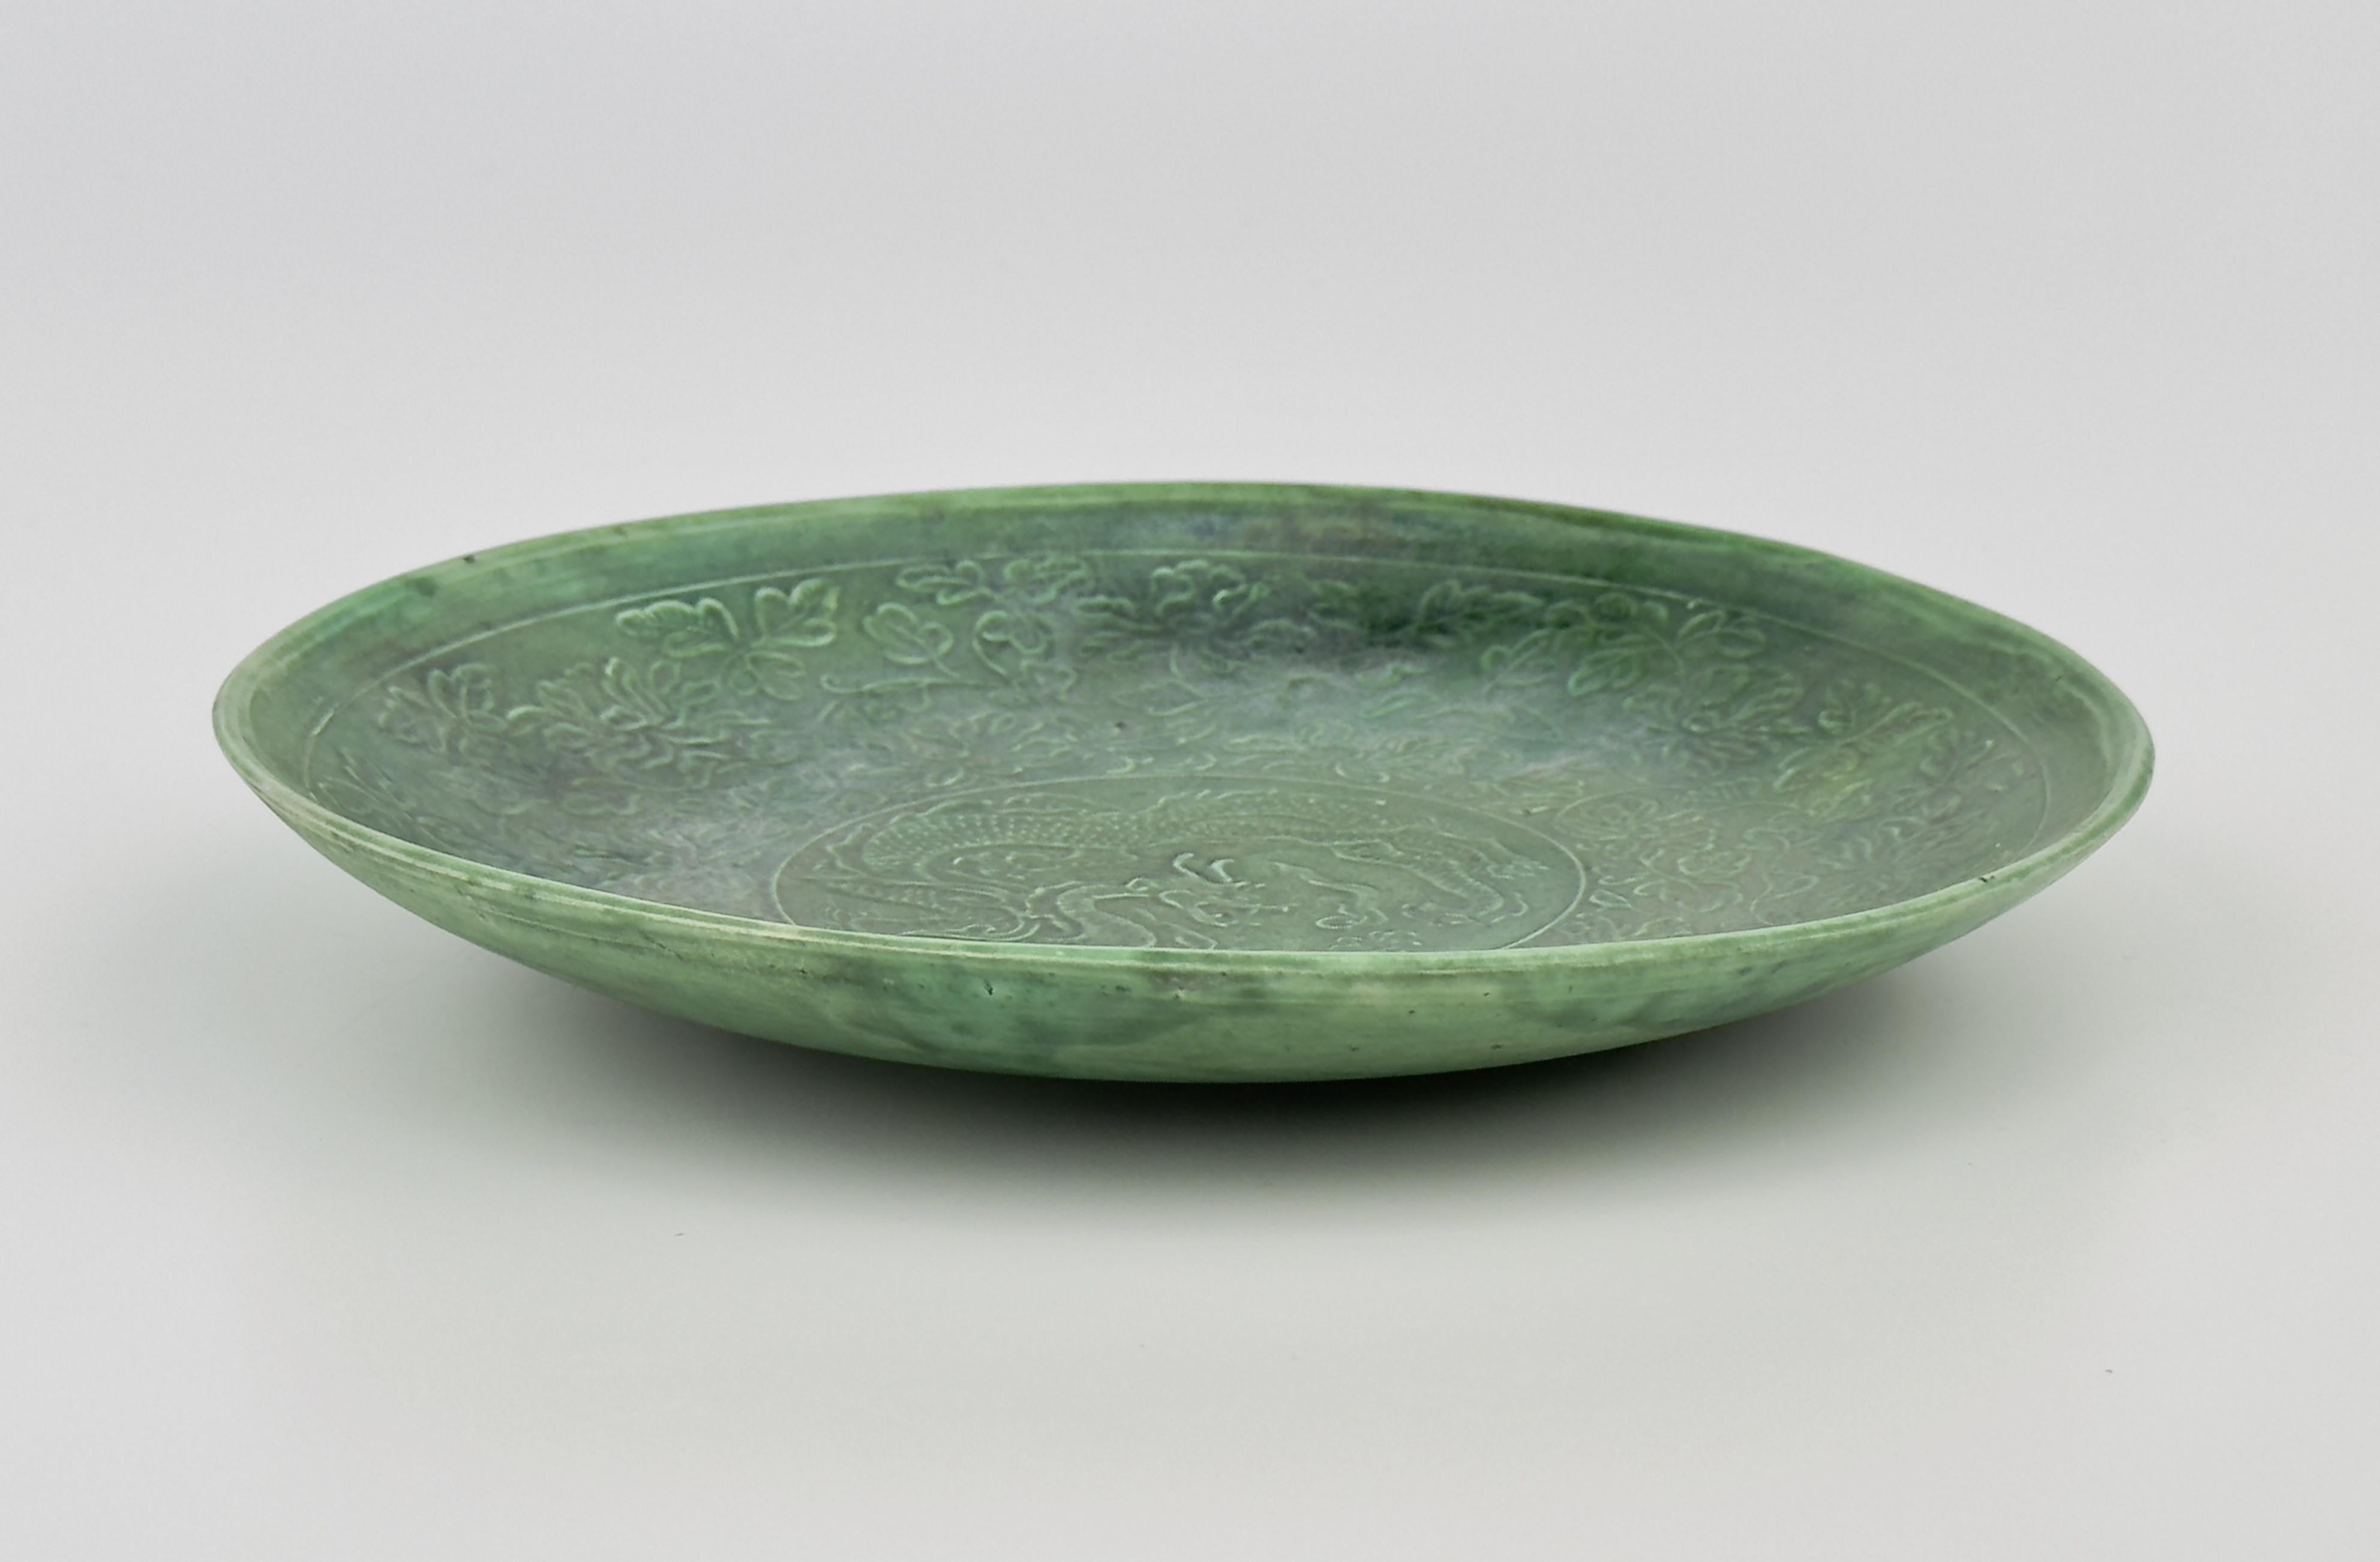 This green-glazed bowl was finely crafted with an attention to detail that highlights the skill of the Cizhou green and Ding ware potter. Its delicate form has been adorned with a dragon in the center. Surrounding the central dragon motif is a